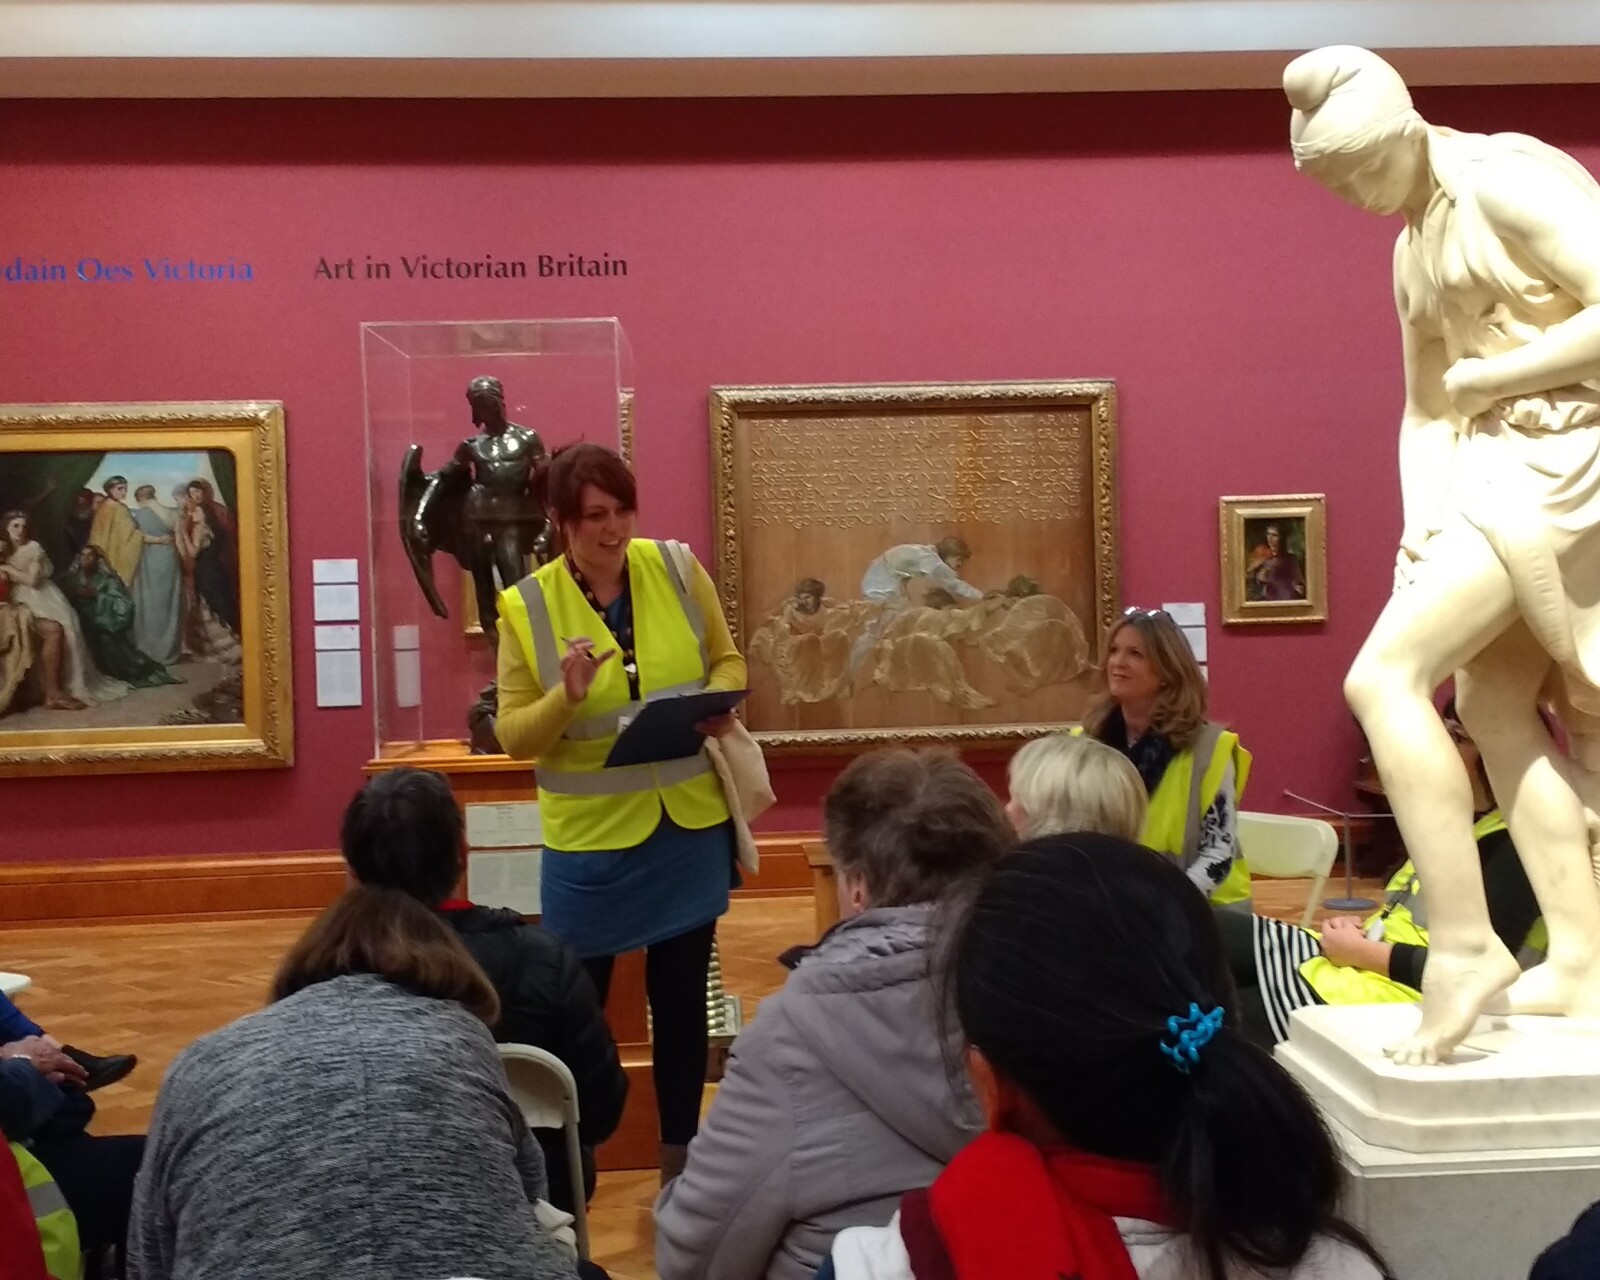 A crowd of people sitting in the Victorian Art gallery at National Museum Cardiff, listening to a tour guide